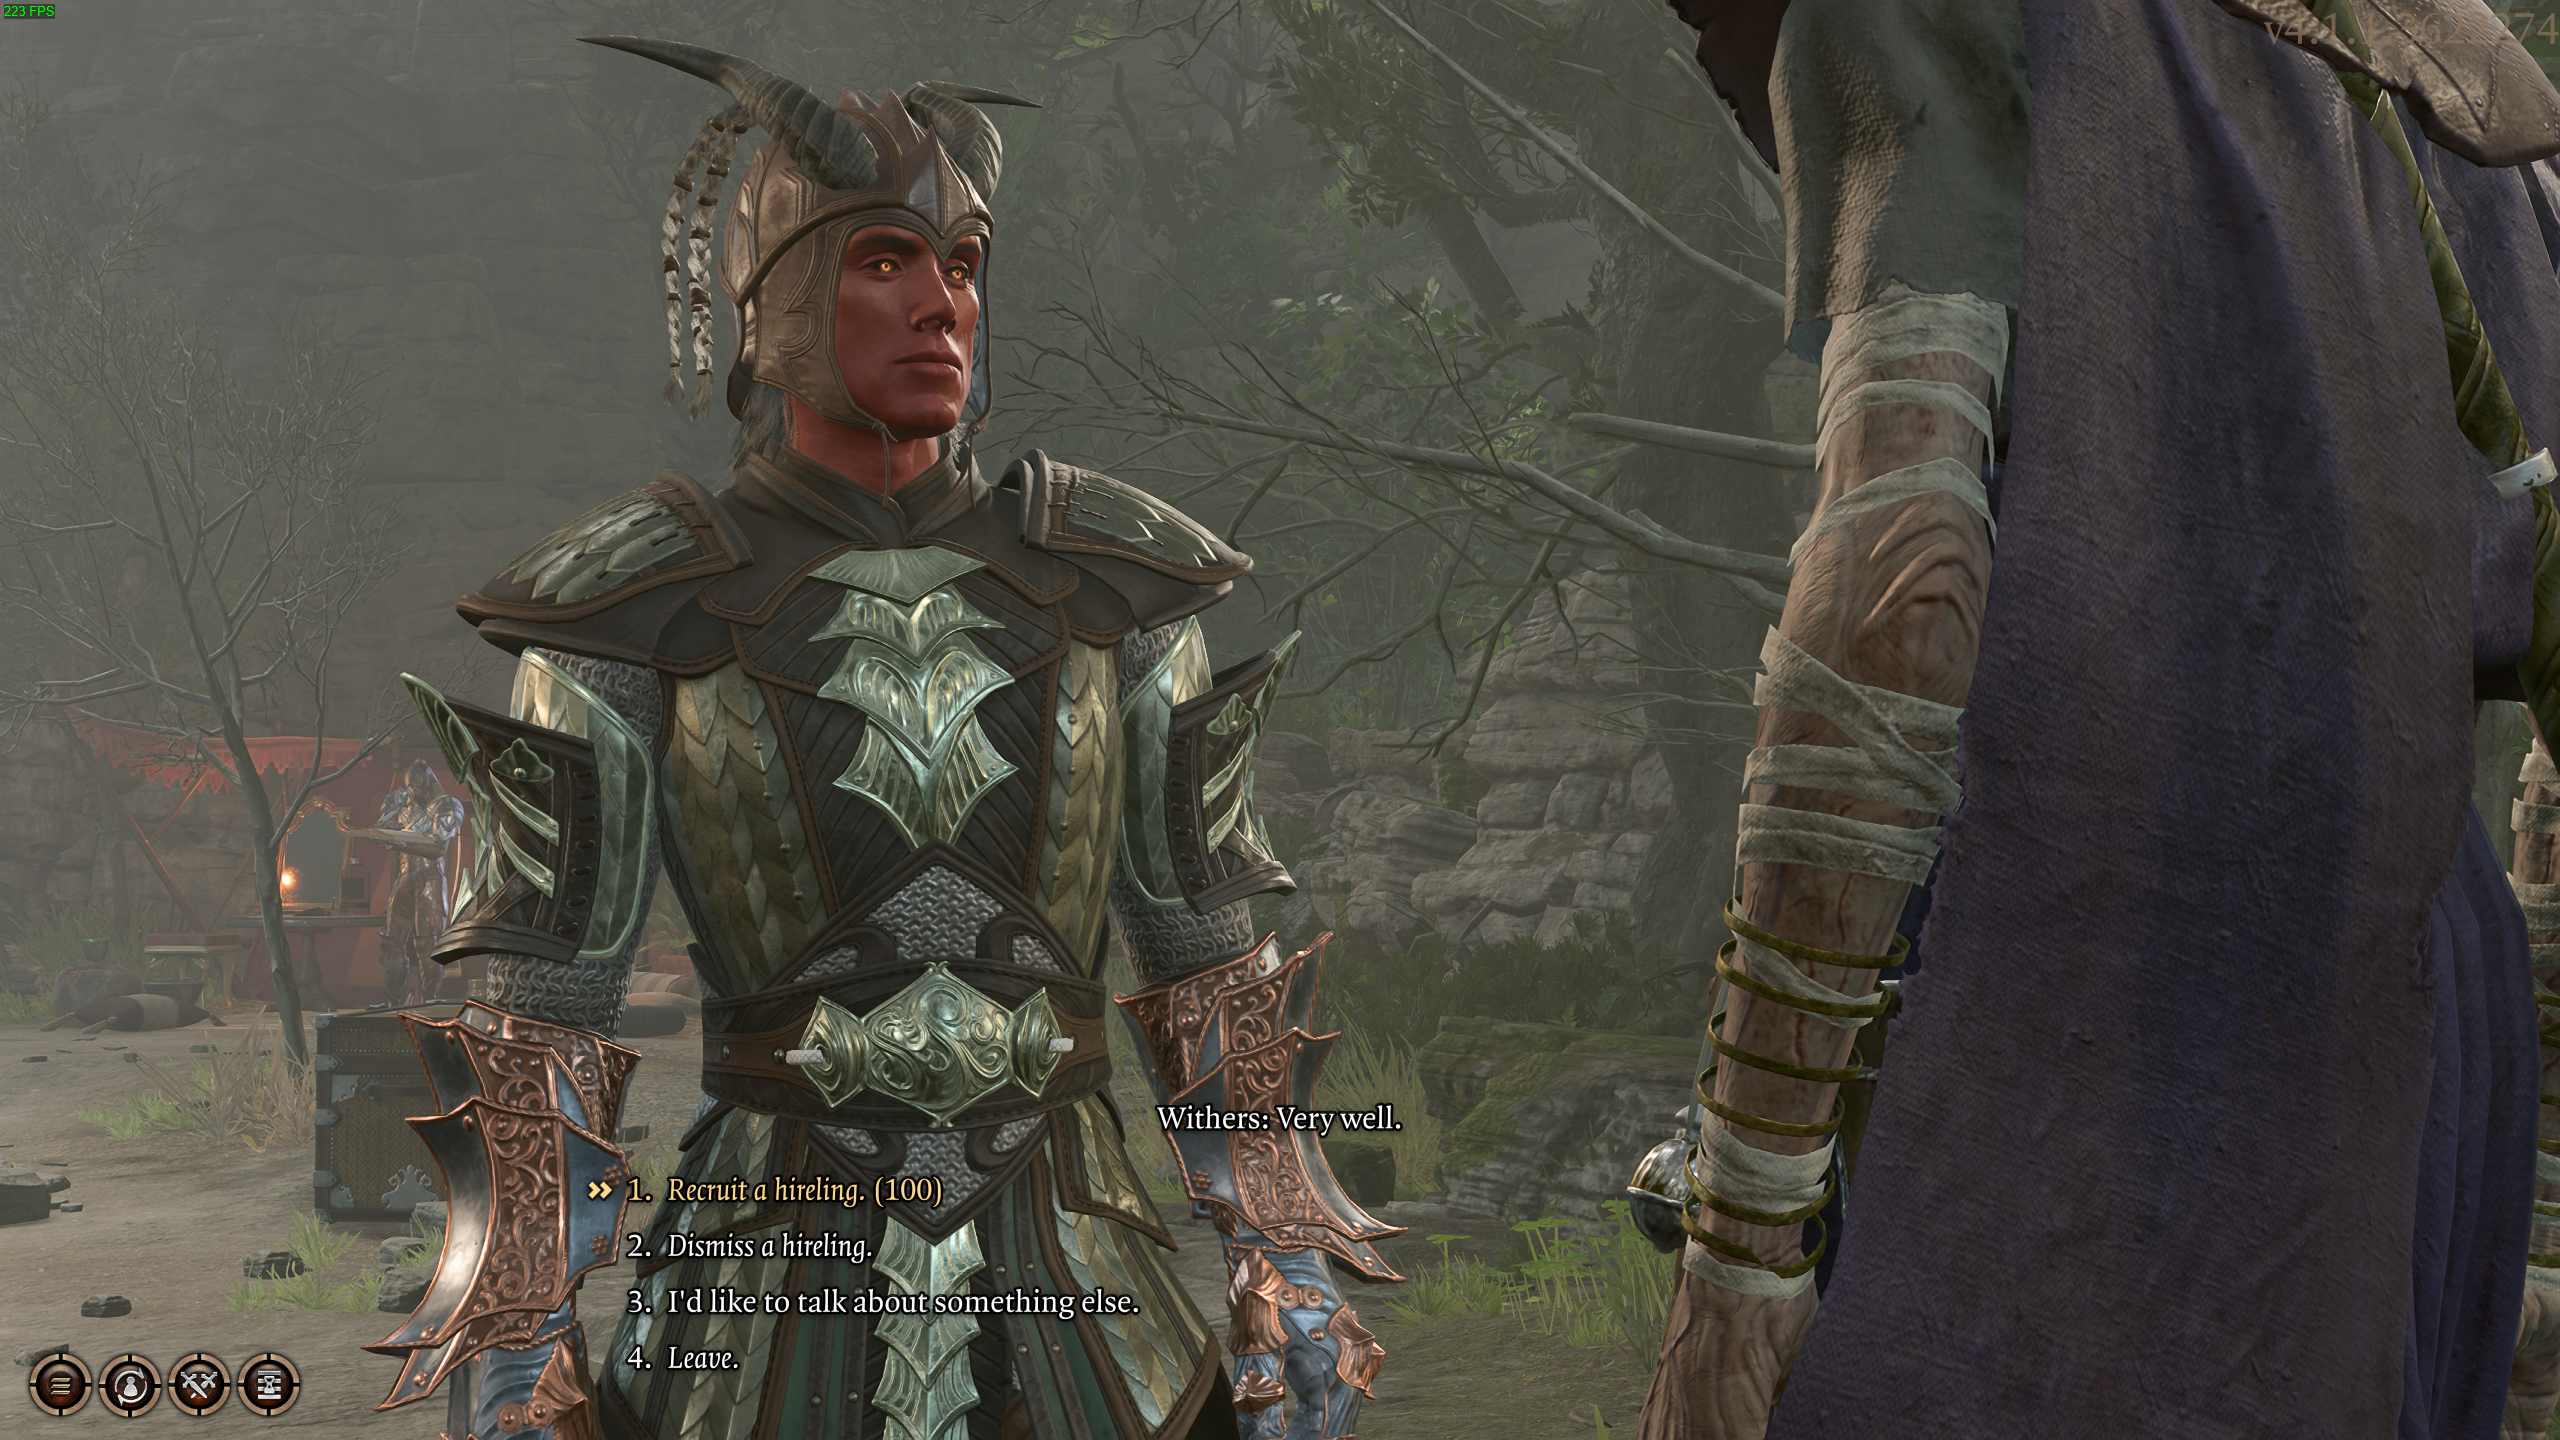 Withers is the main way to hire hirelings in Baldur's Gate 3. A screenshot from Baldur's Gate 3 shows a Tiefling character facing Withers.